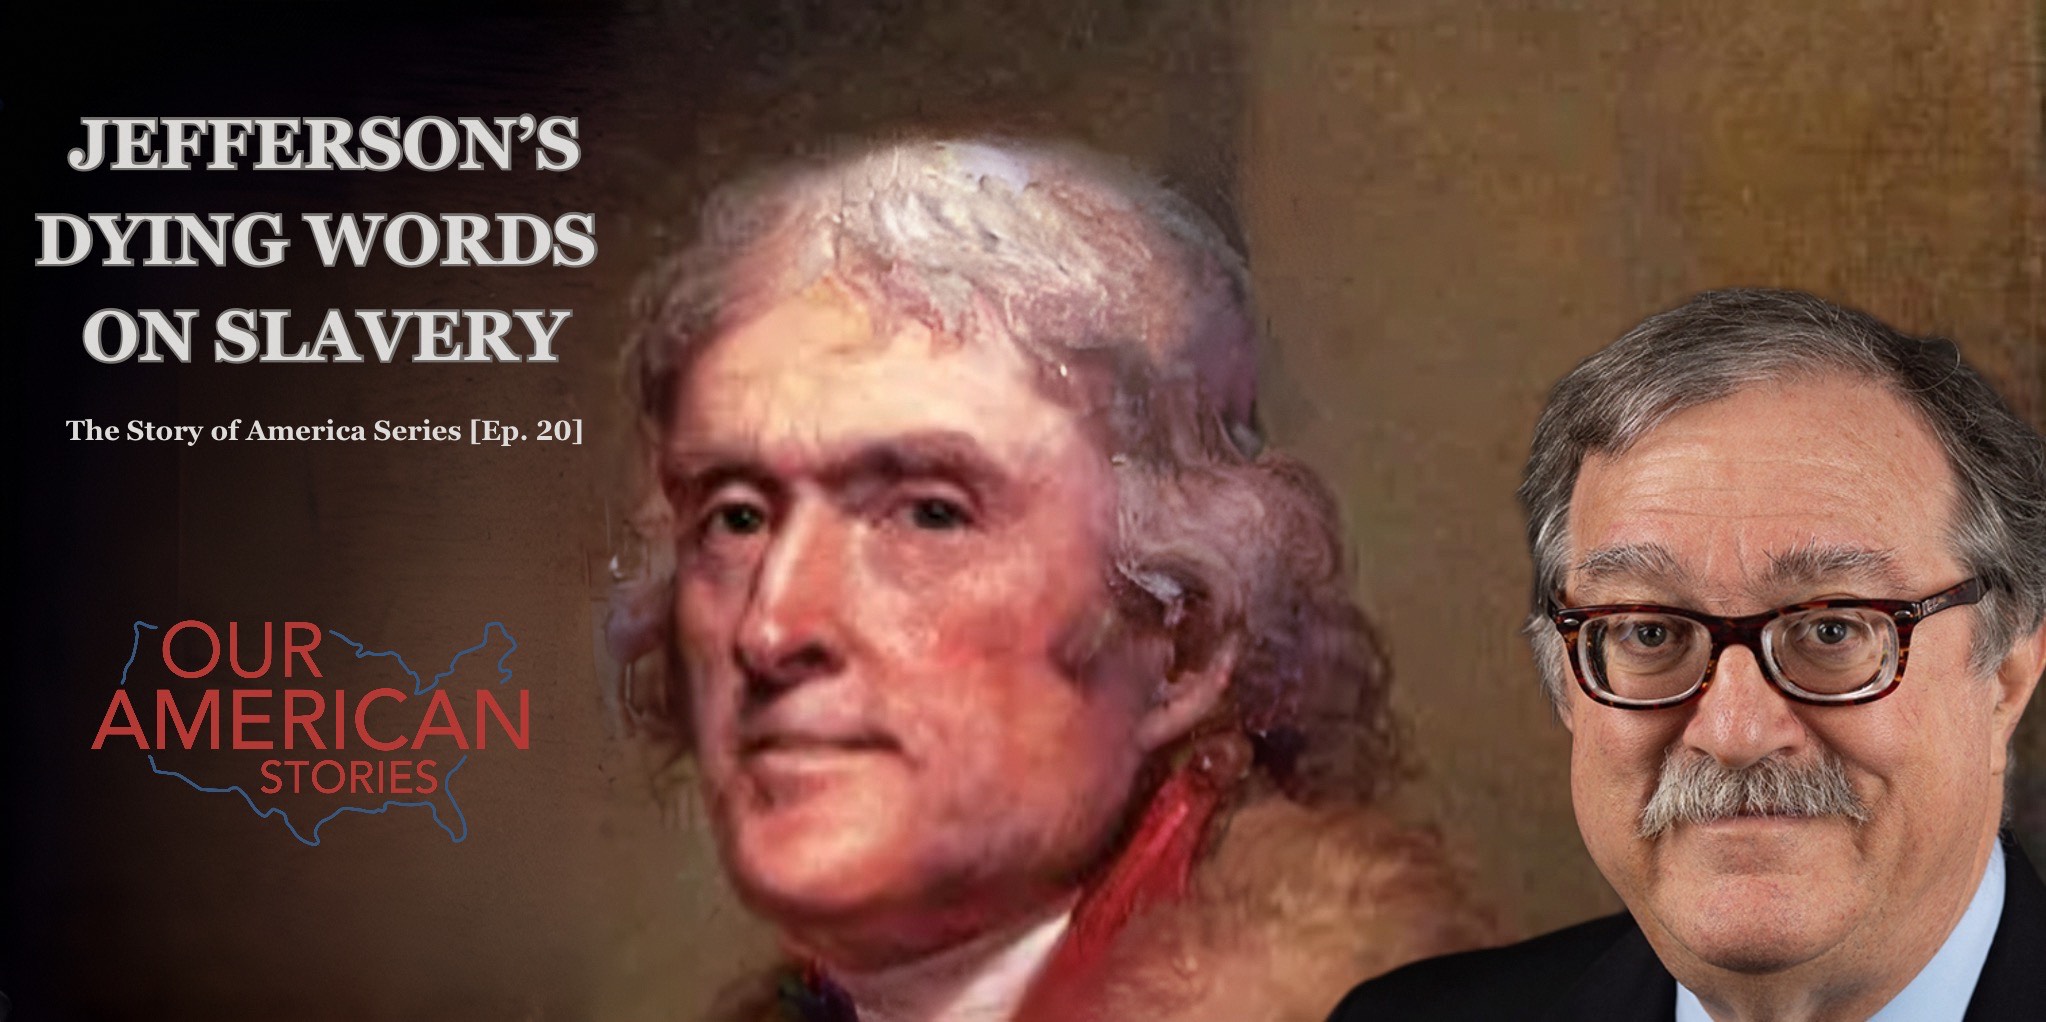 Thomas Jefferson's Dying Words on Slavery: The Story of America Series [Ep. 20]